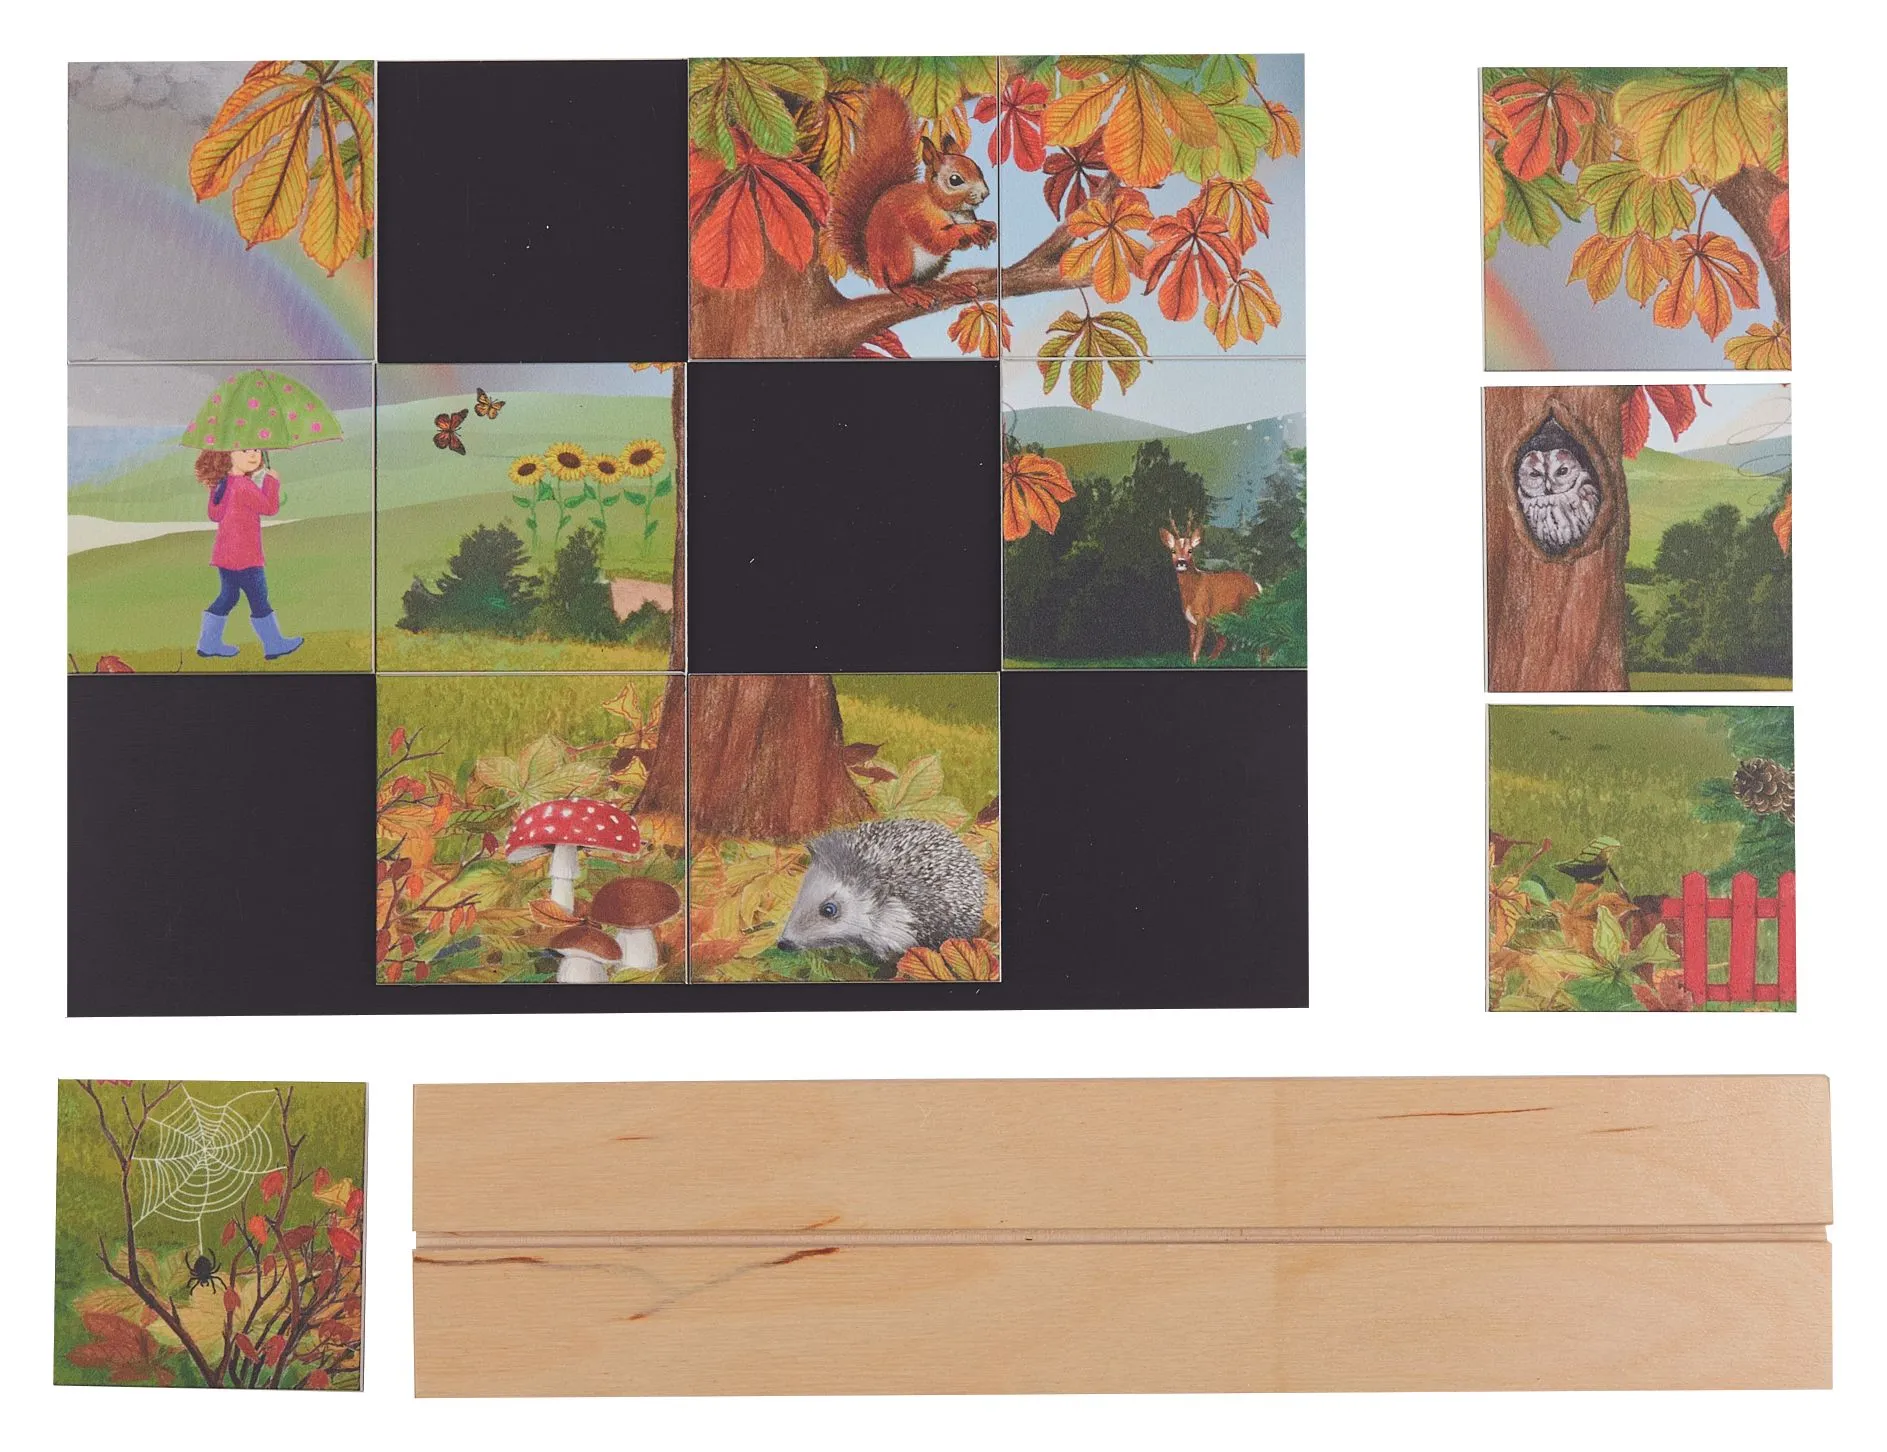 Magnetpuzzle "Herbst"